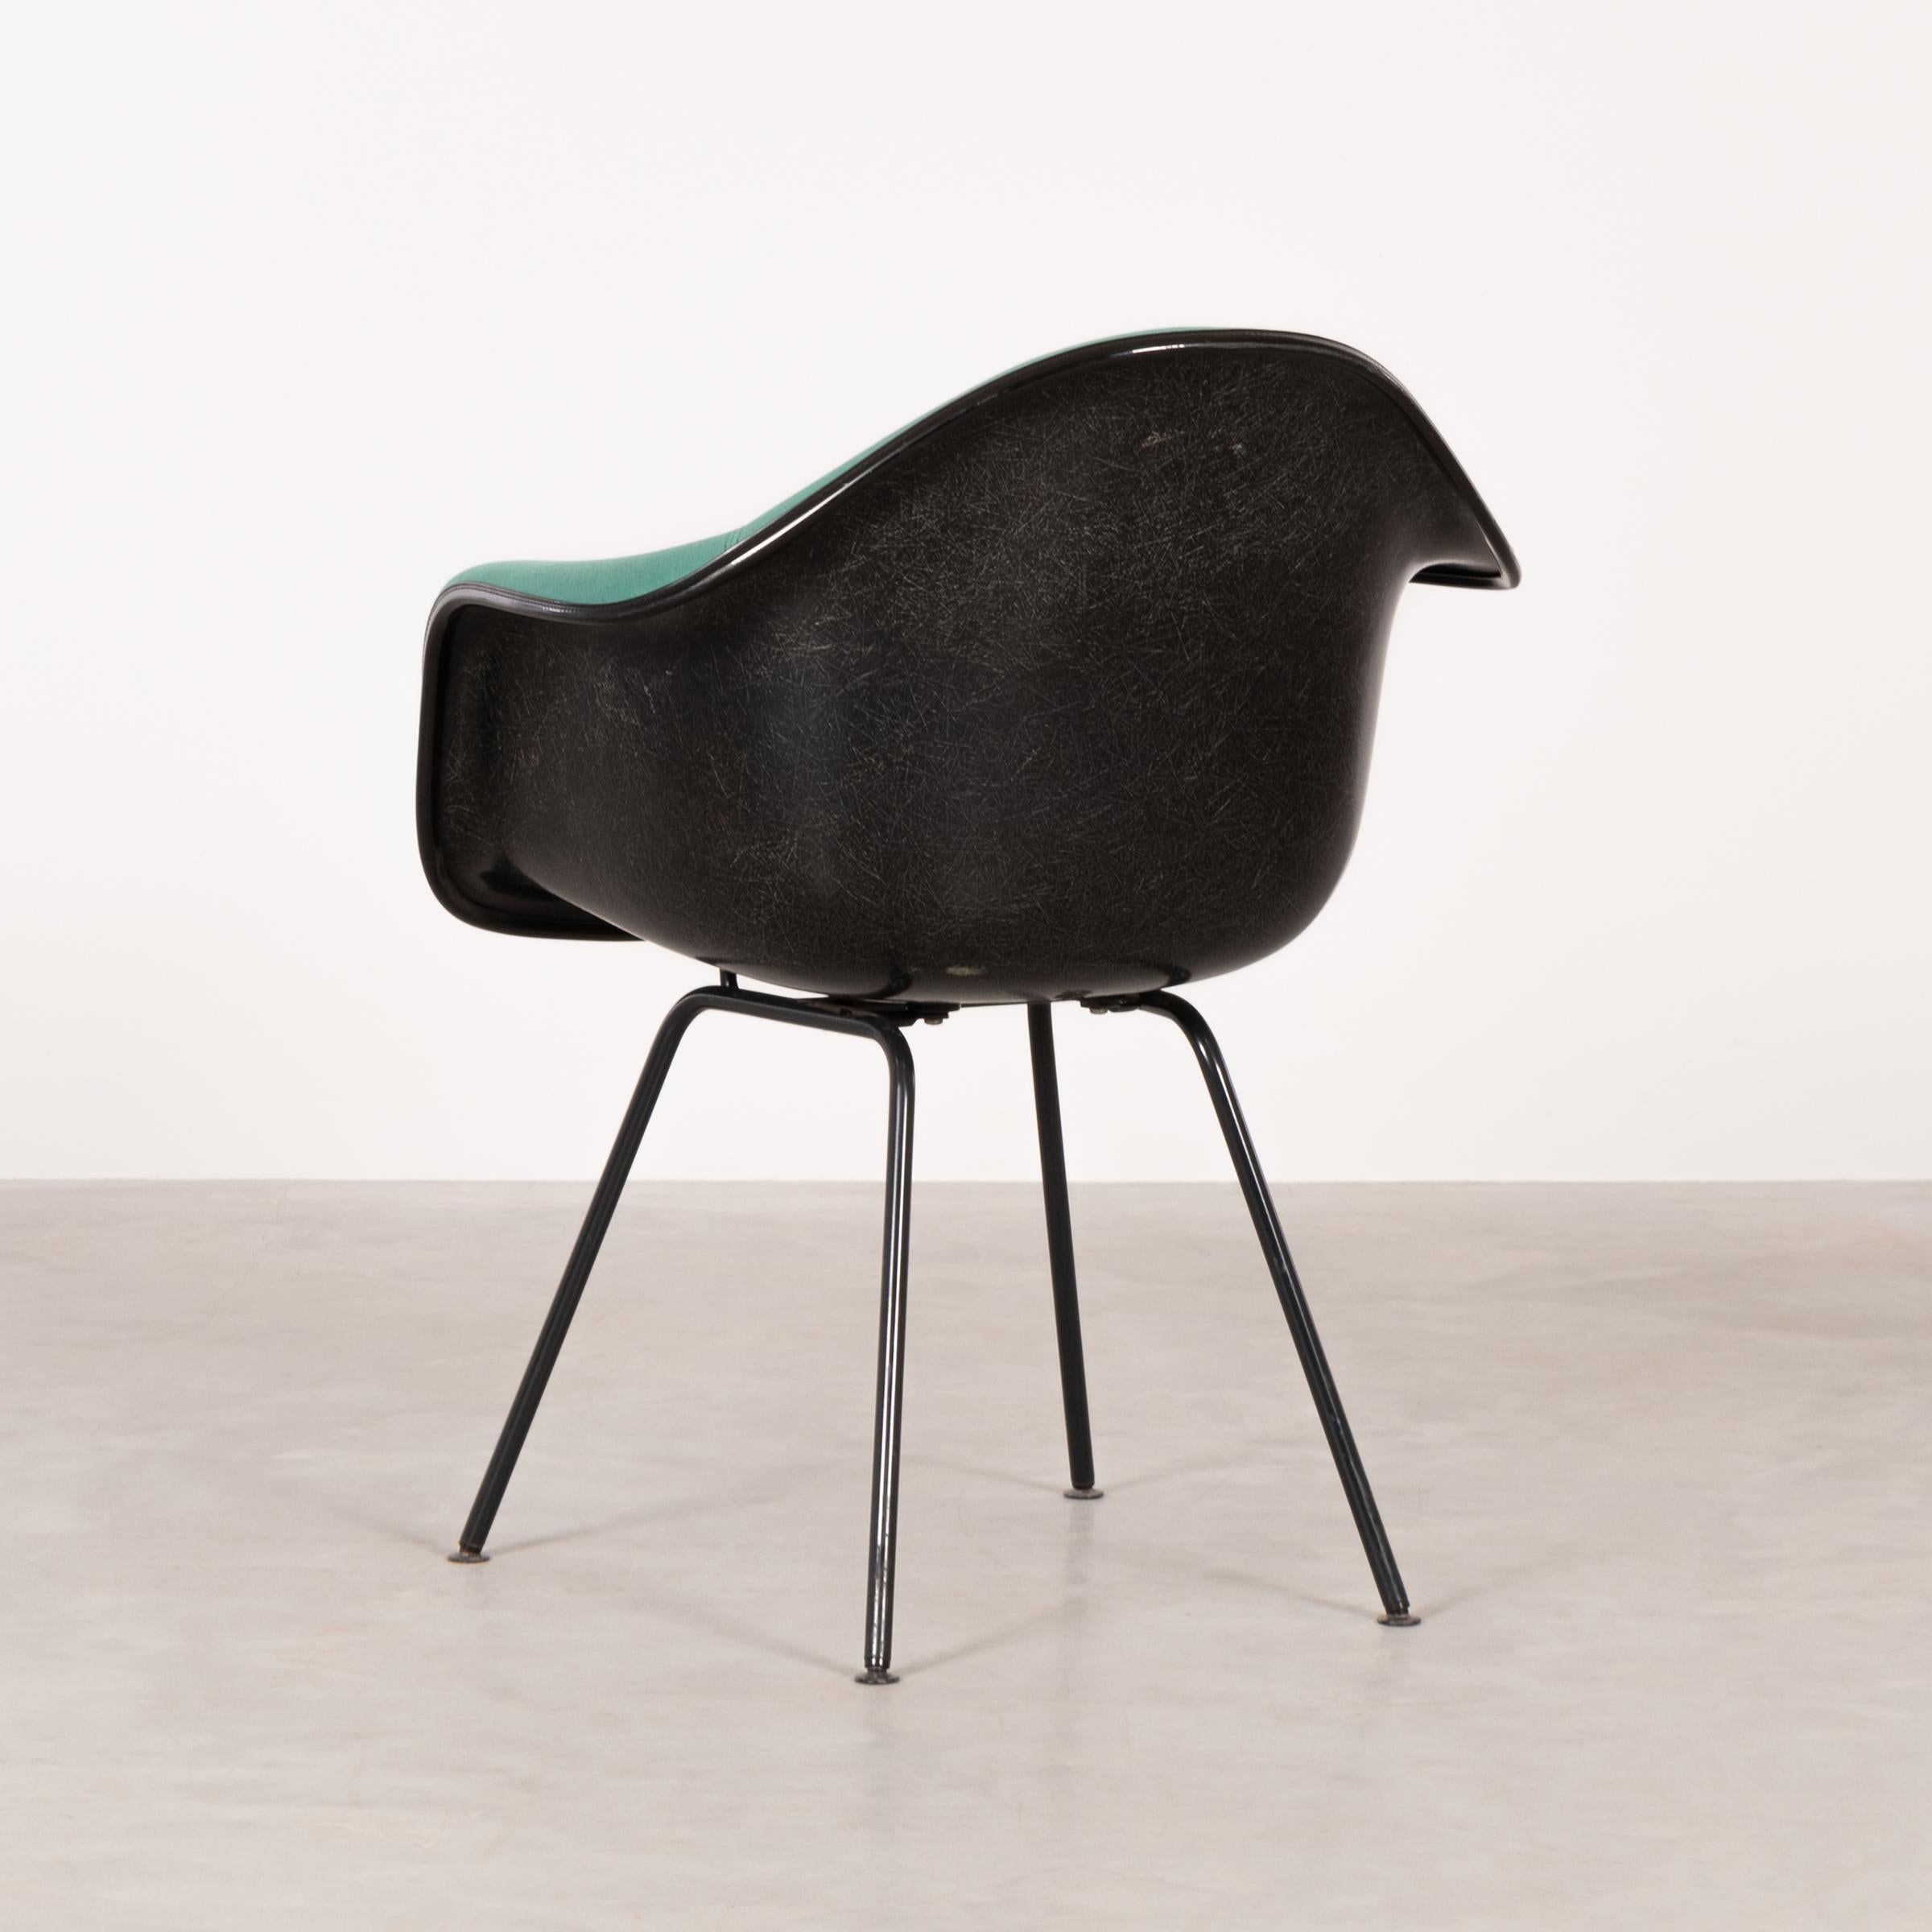 Mid-20th Century Charles and Ray Eames Black DAX Dining Chairs with Green Fabric by Vitra